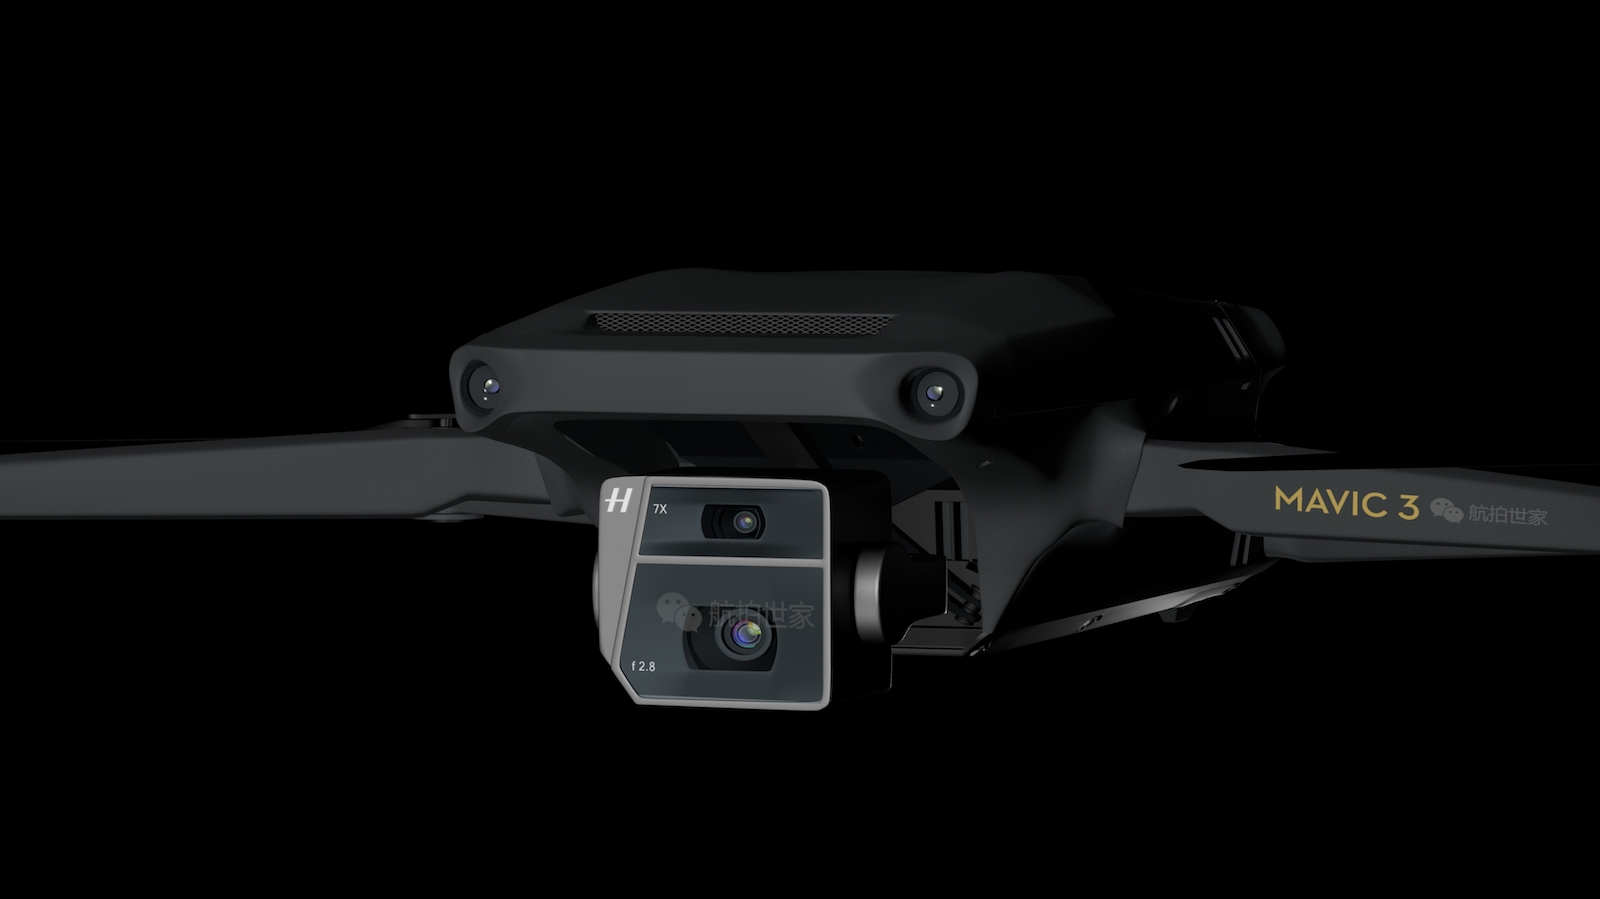 Check out these DJI Mavic 3 drone renders - Photo Rumors